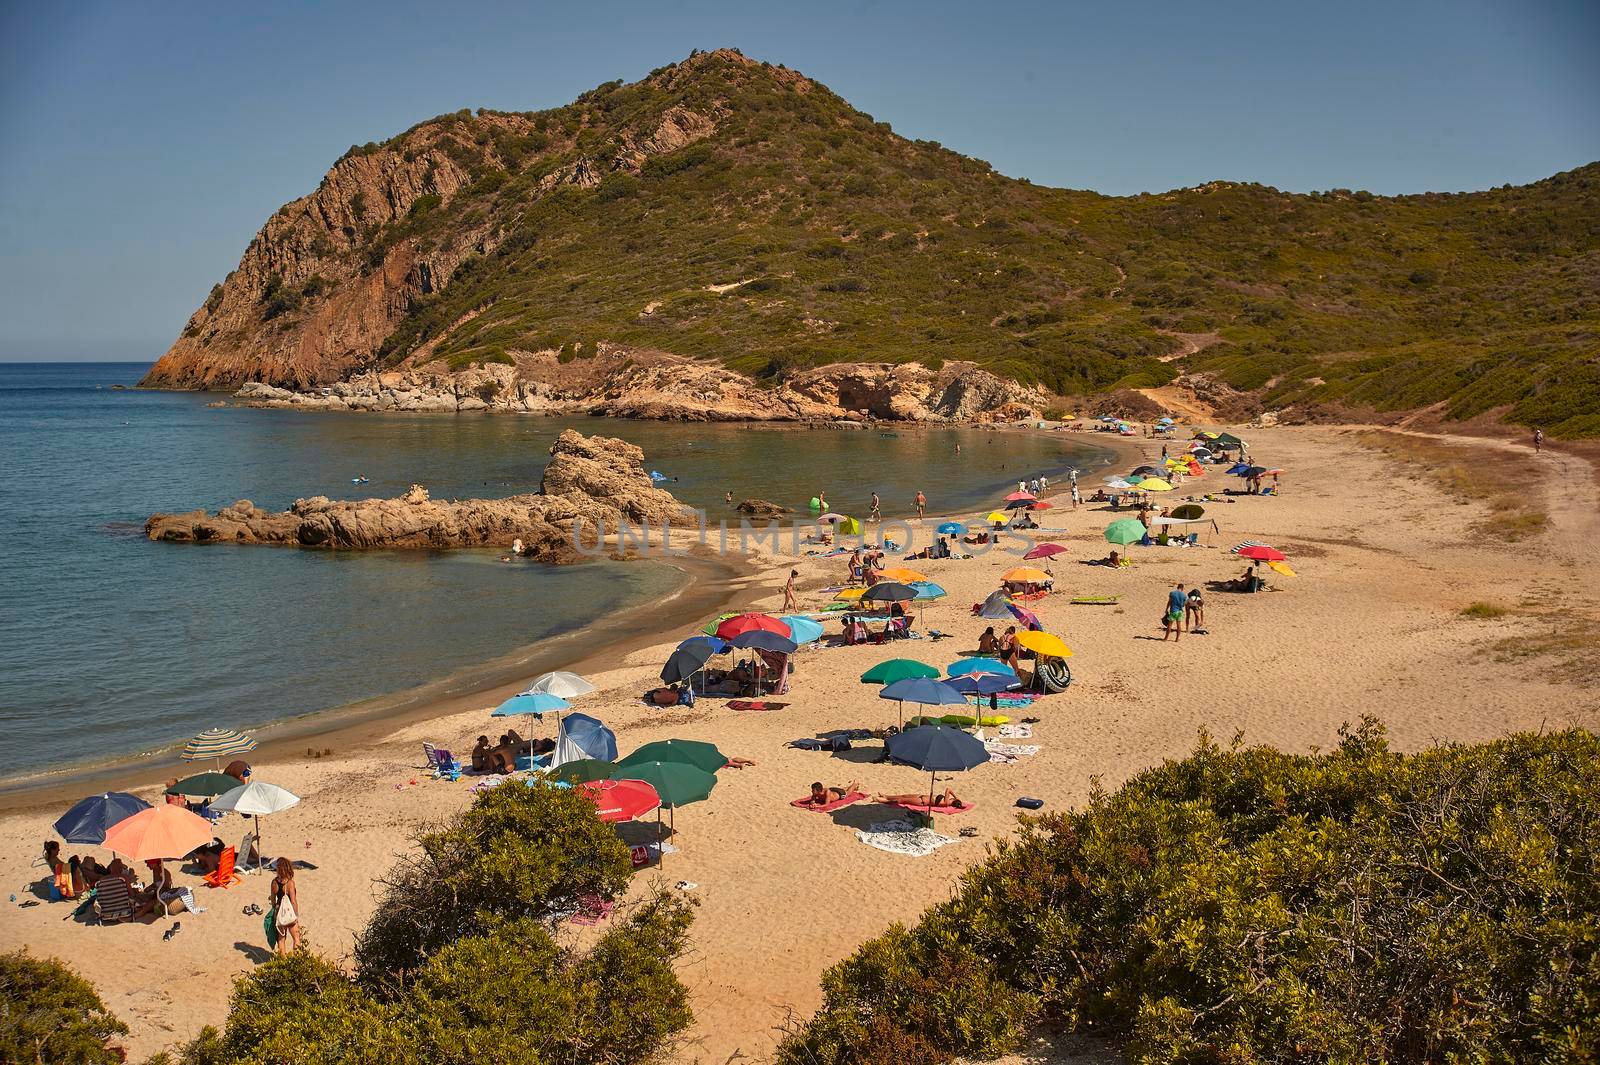 Beach of southern Sardinia (Cala Sa Figu) inserted in a natural bay full of tourists with umbrellas on vacation.